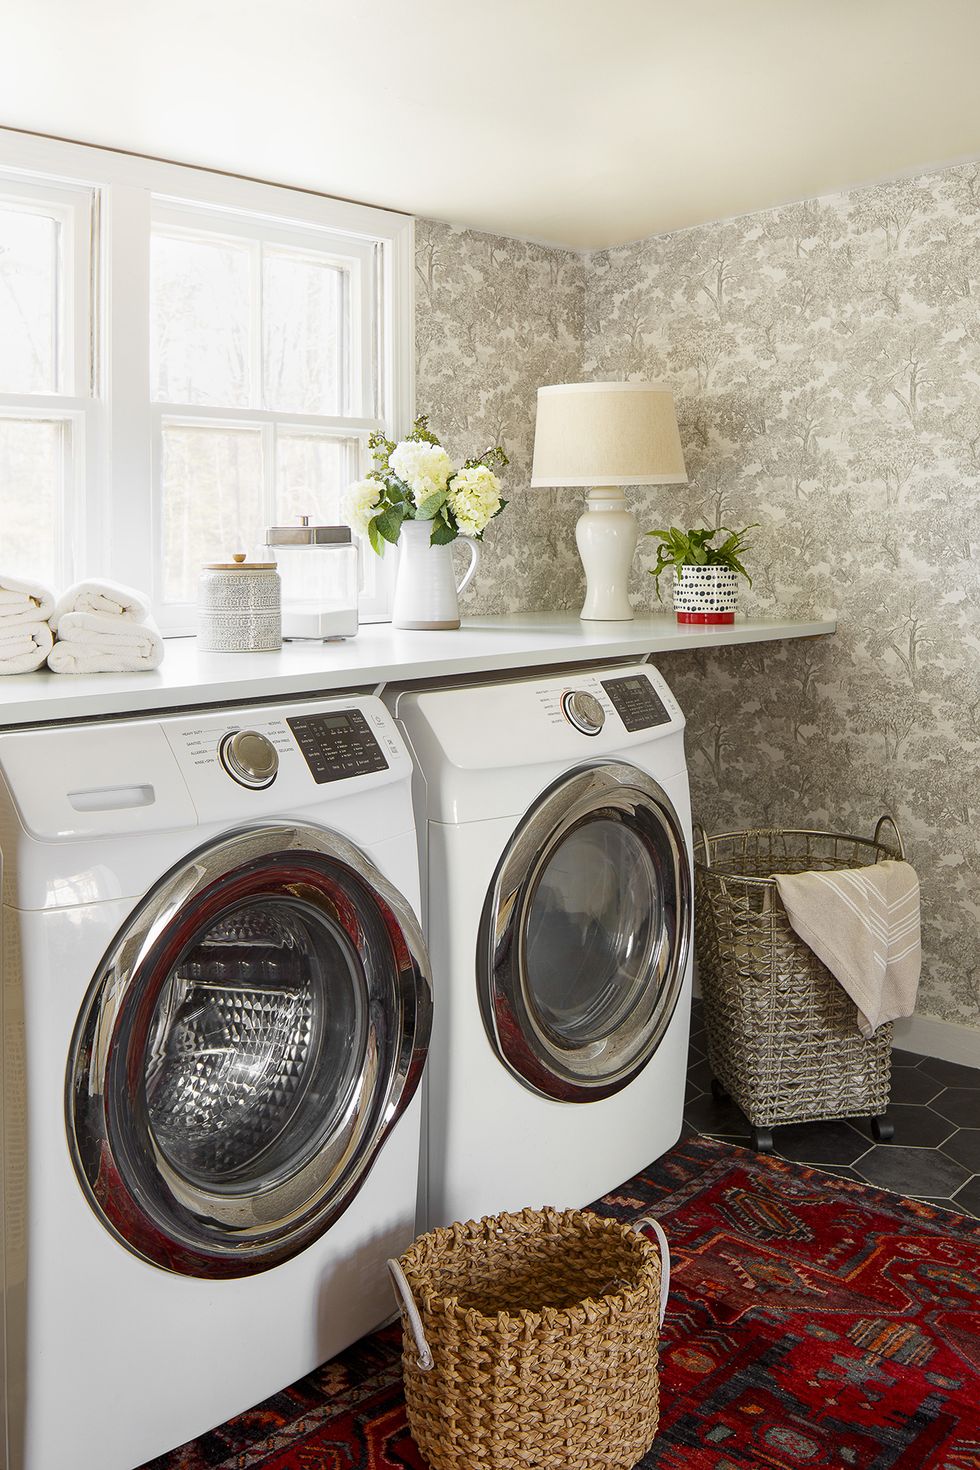 15 Awesome Storage Ideas for Small Laundry Spaces